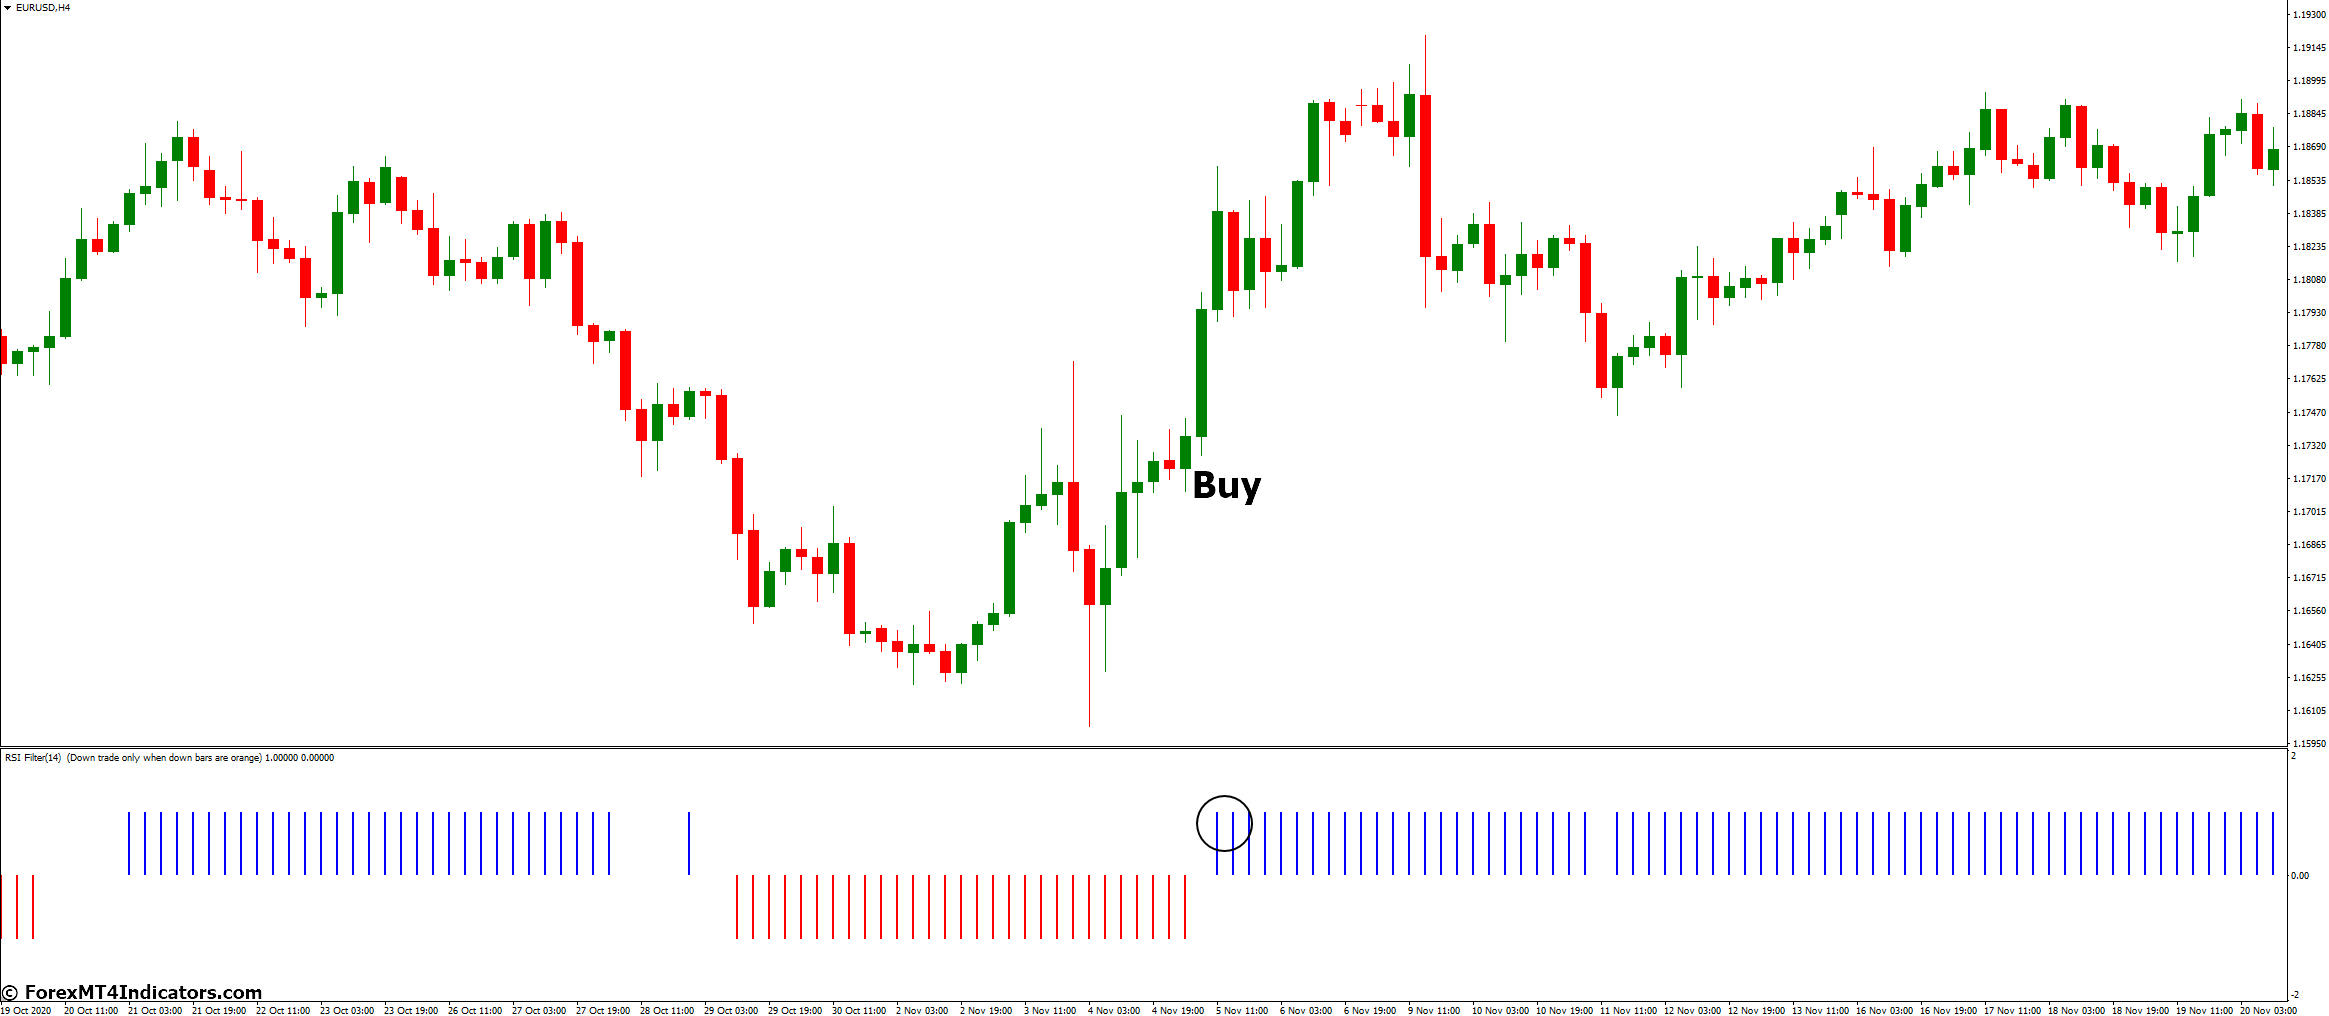 How to Trade with Flat Trend Rsi Indicator - Buy Entry